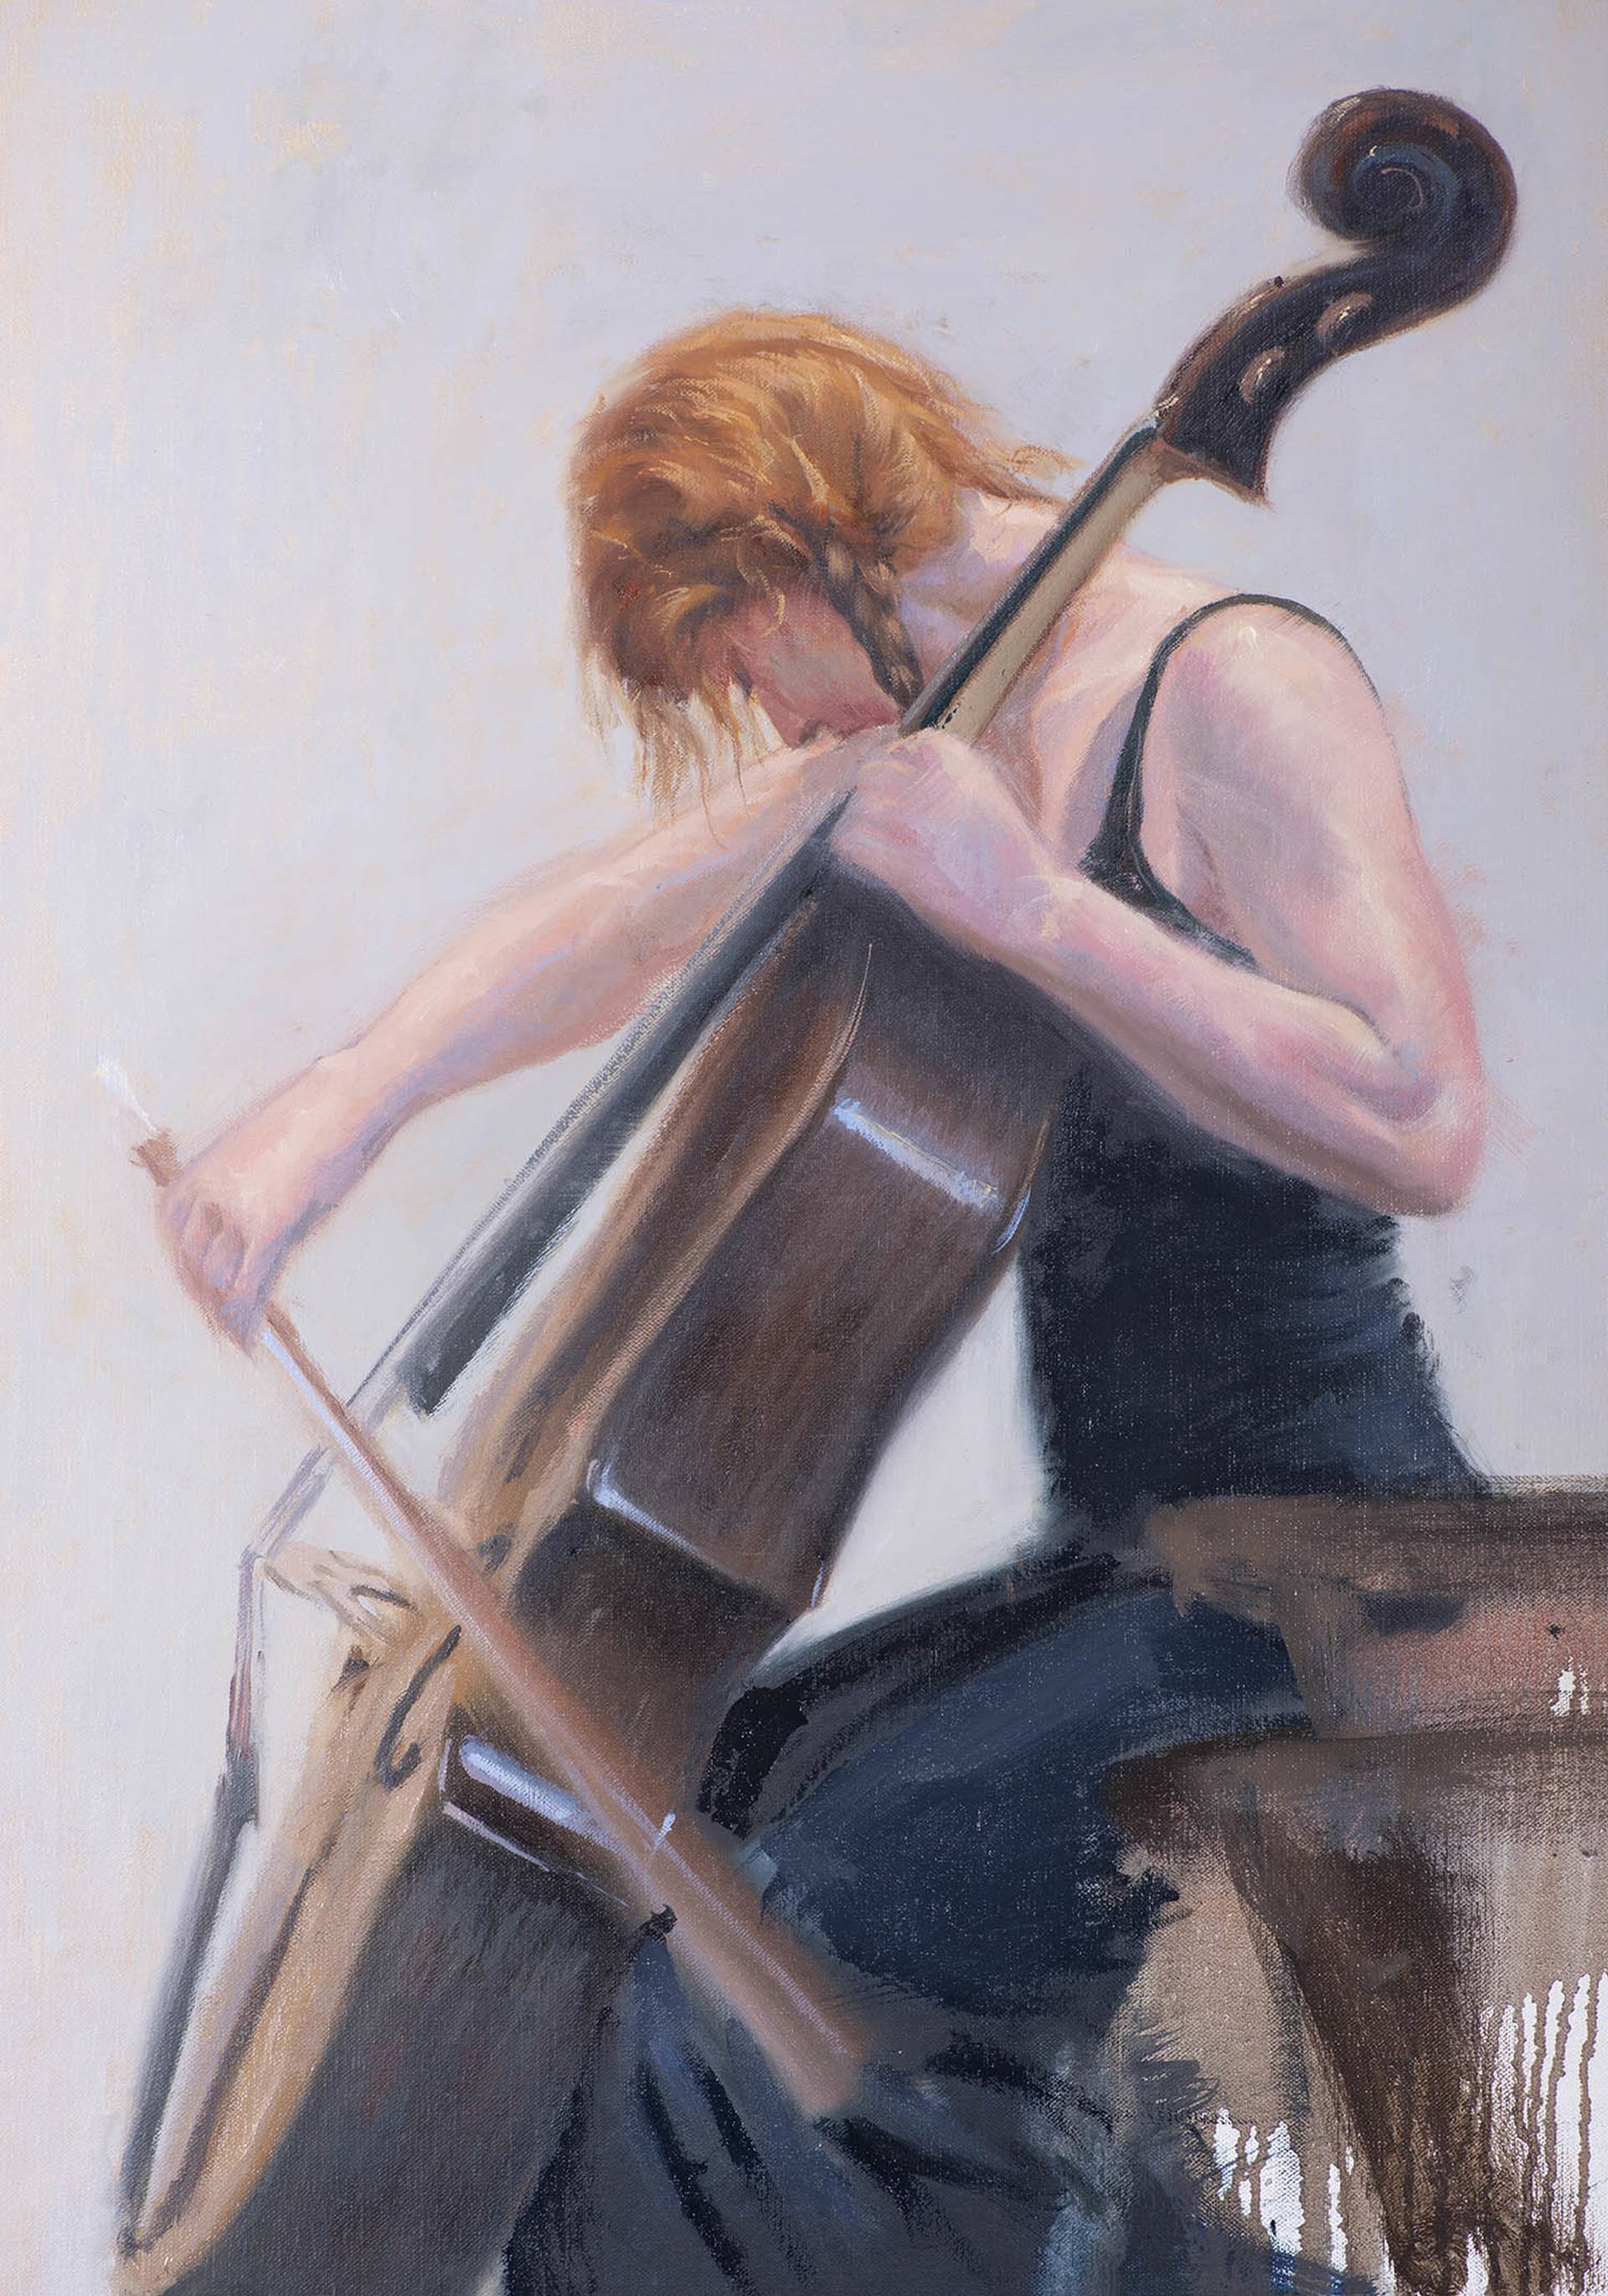 cello painting watercolor